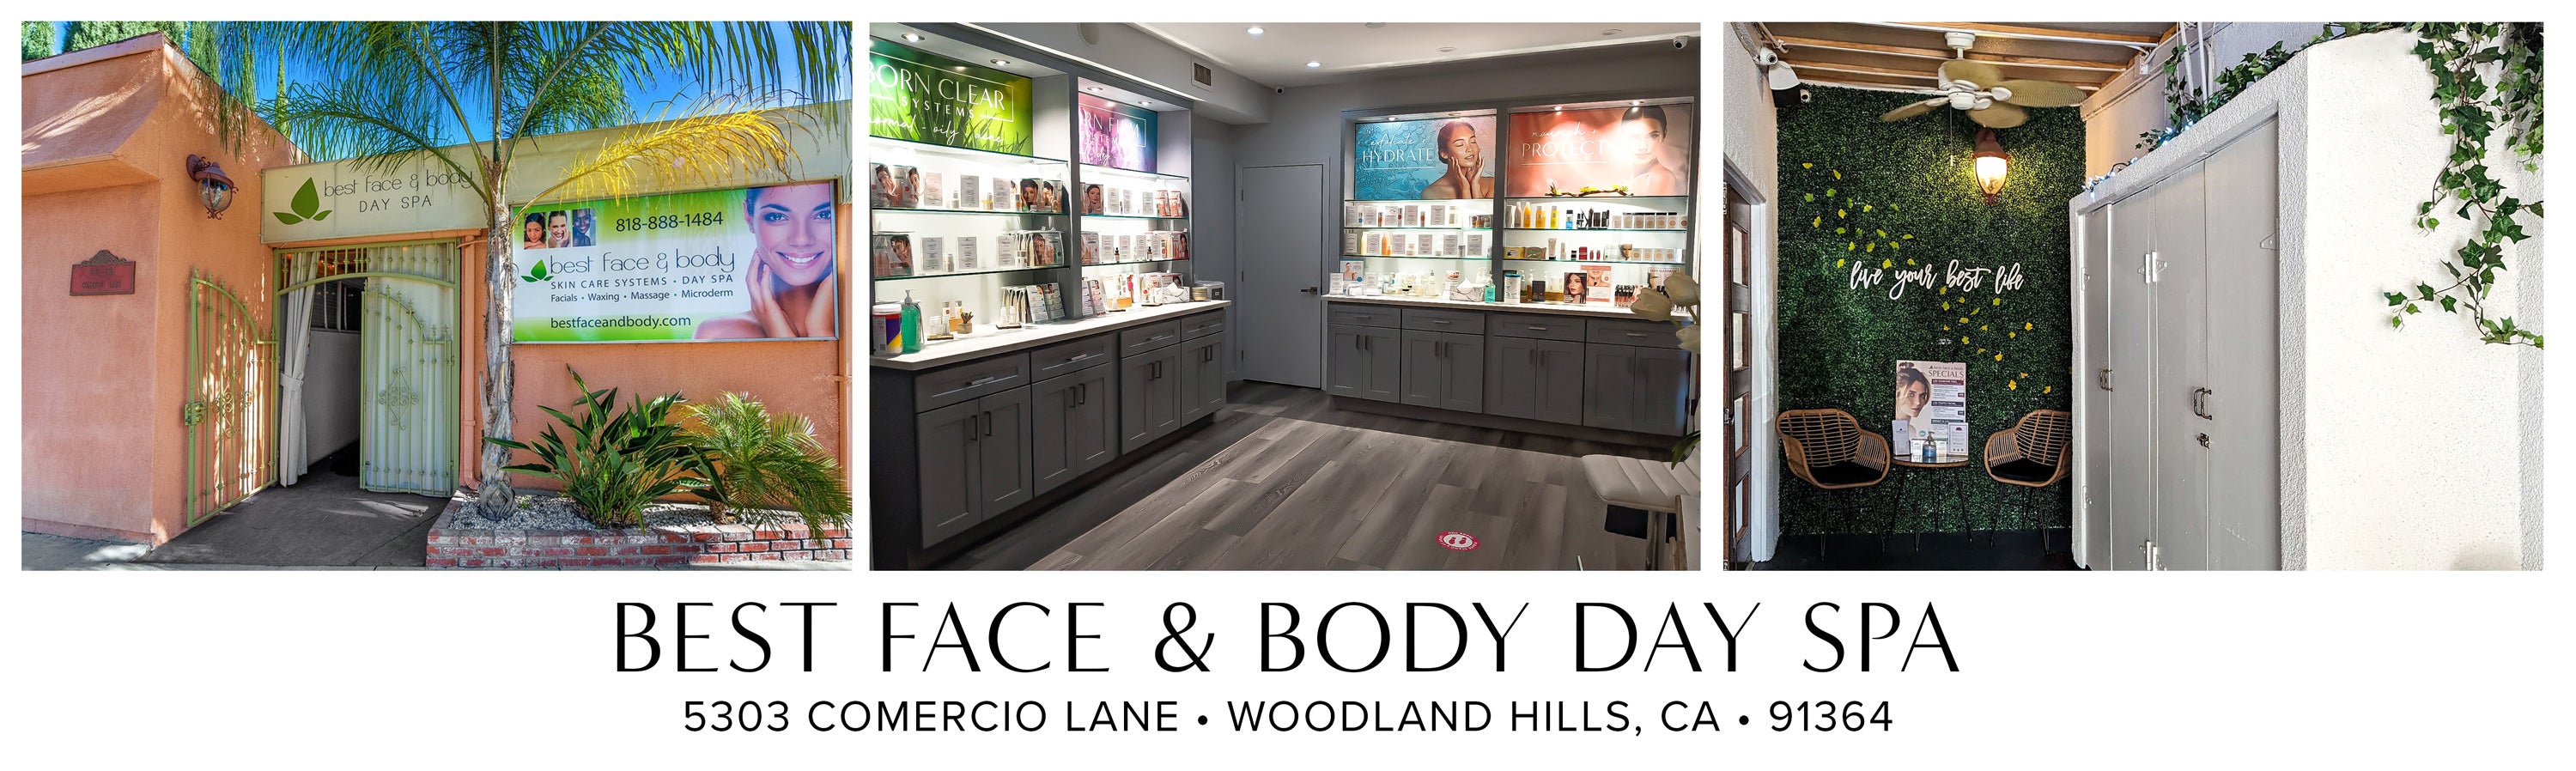 Photographs of spa exterior and interior. Best Face & Body Day Spa • 5303 Comercio Lane, Woodland Hills CA 91364